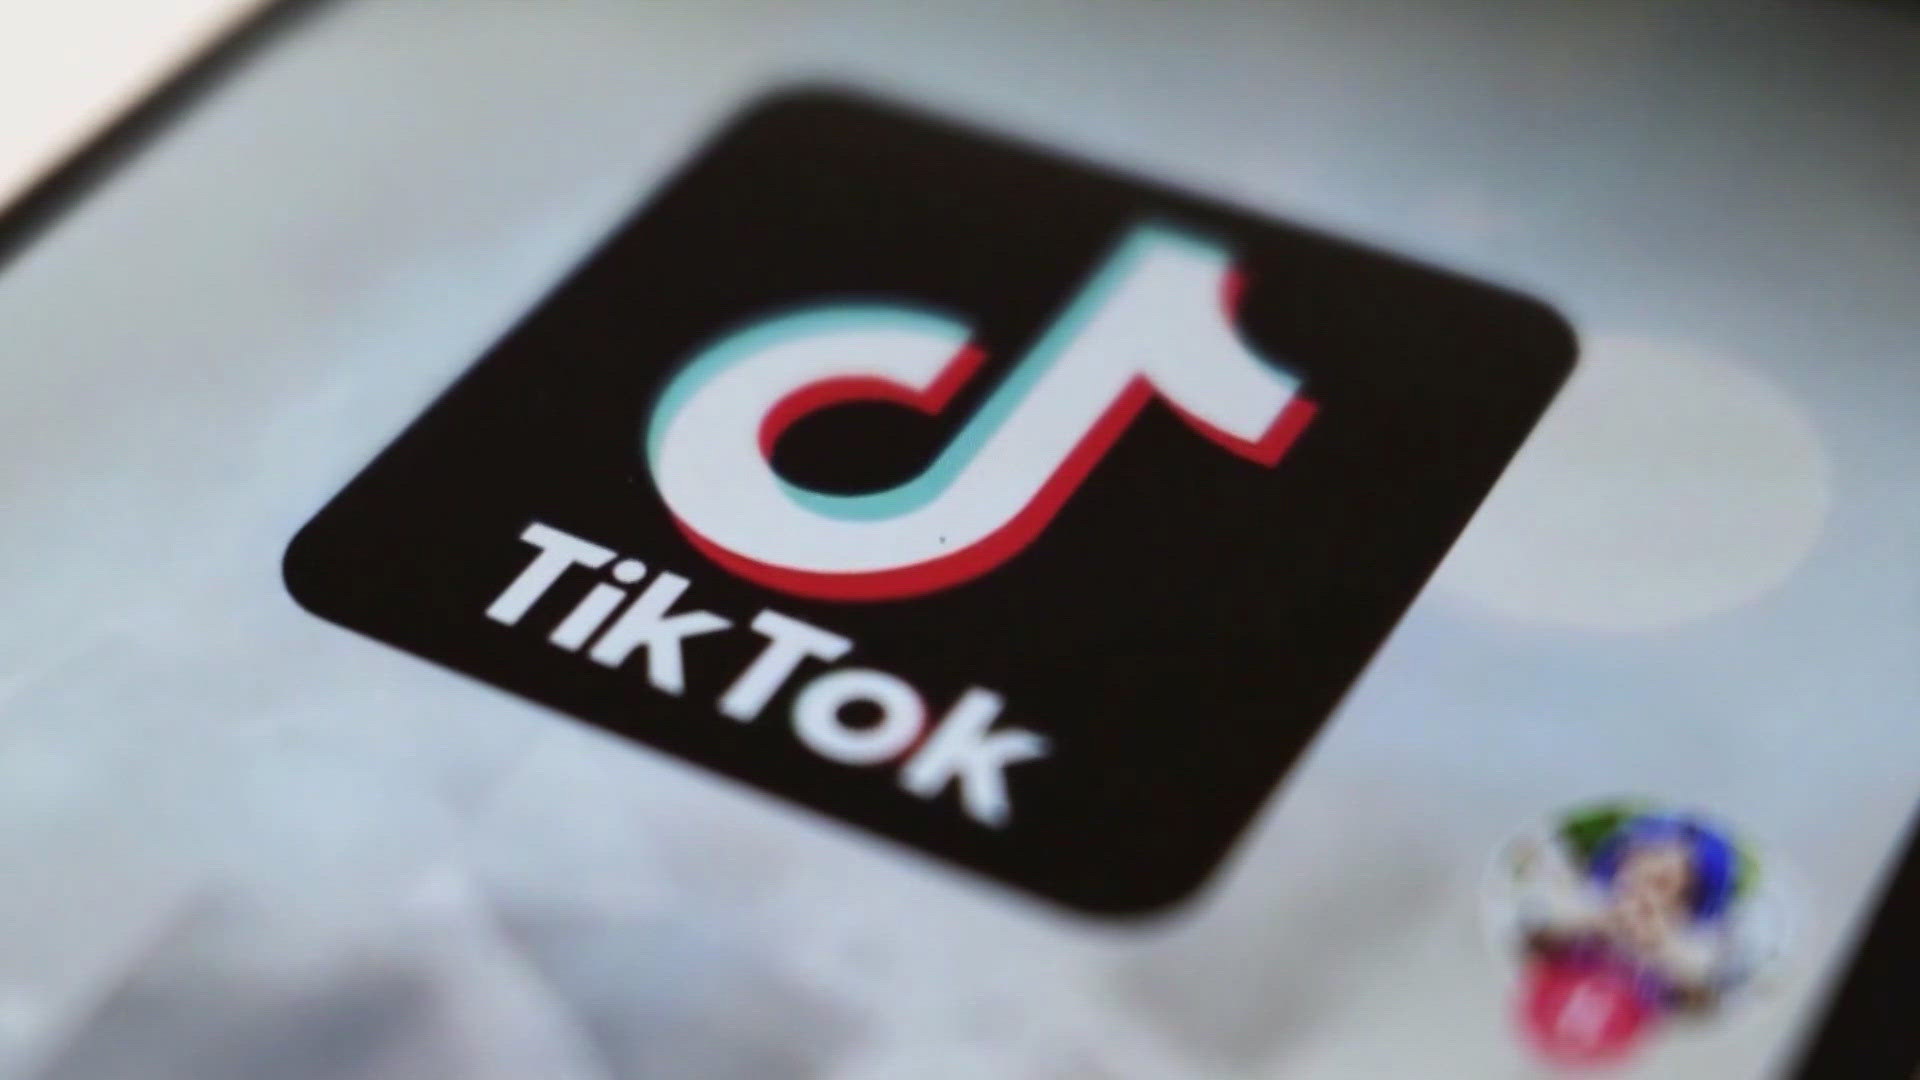 The law requires TikTok’s parent company, ByteDance, to sell the platform within nine months.